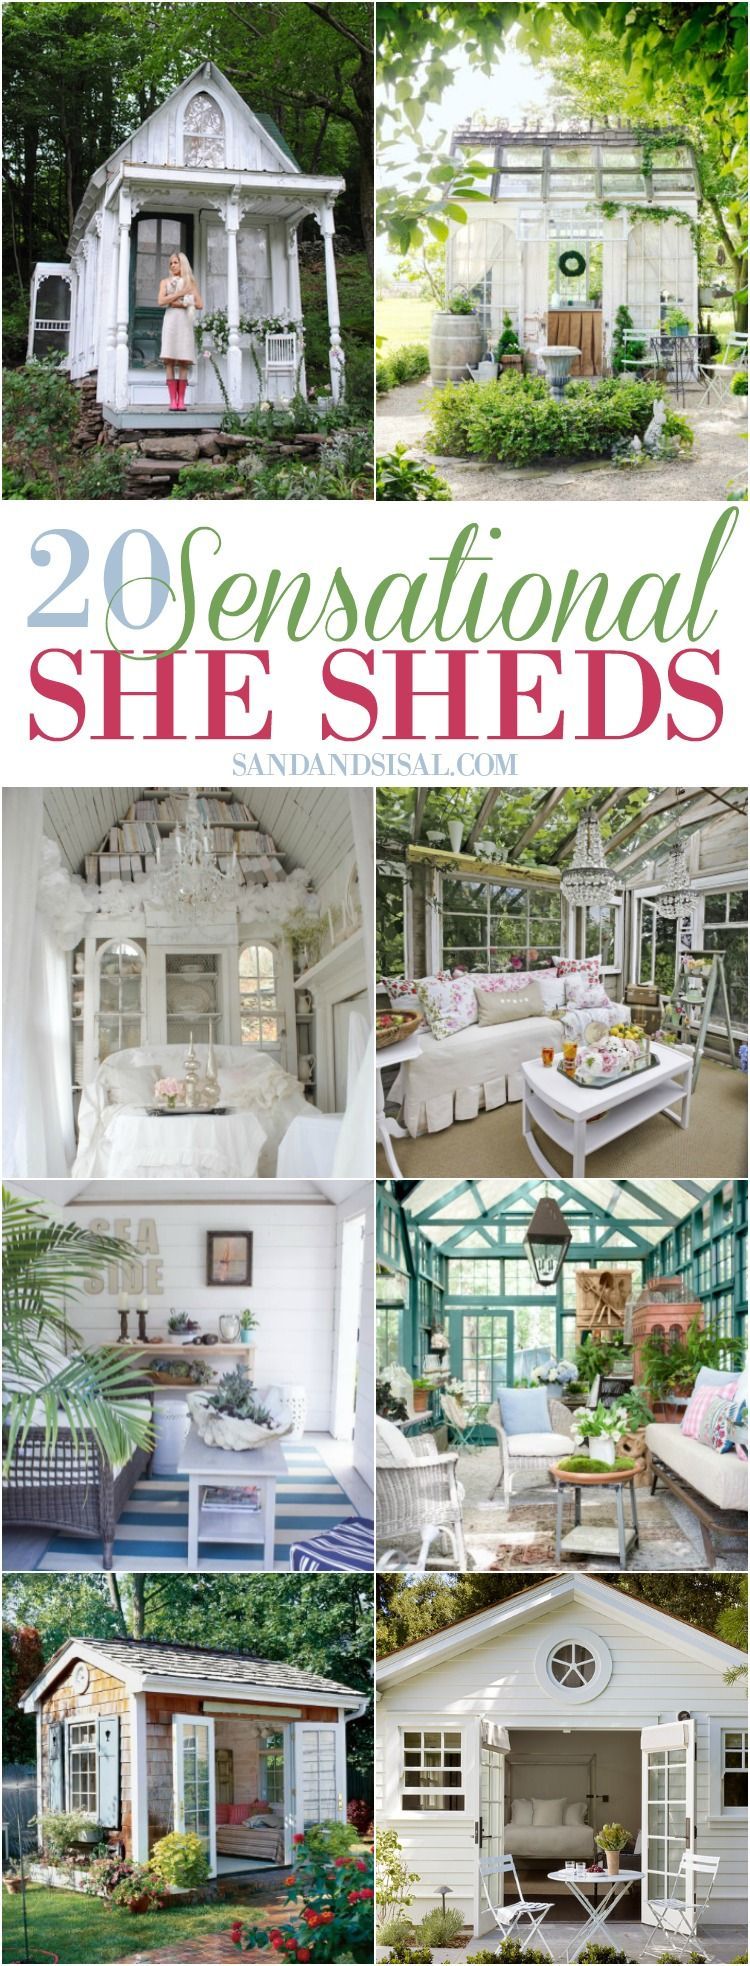 20 Sensational She Shed Ideas.  If you need a little extra space for storage or a lot of extra space for an office, guest room or